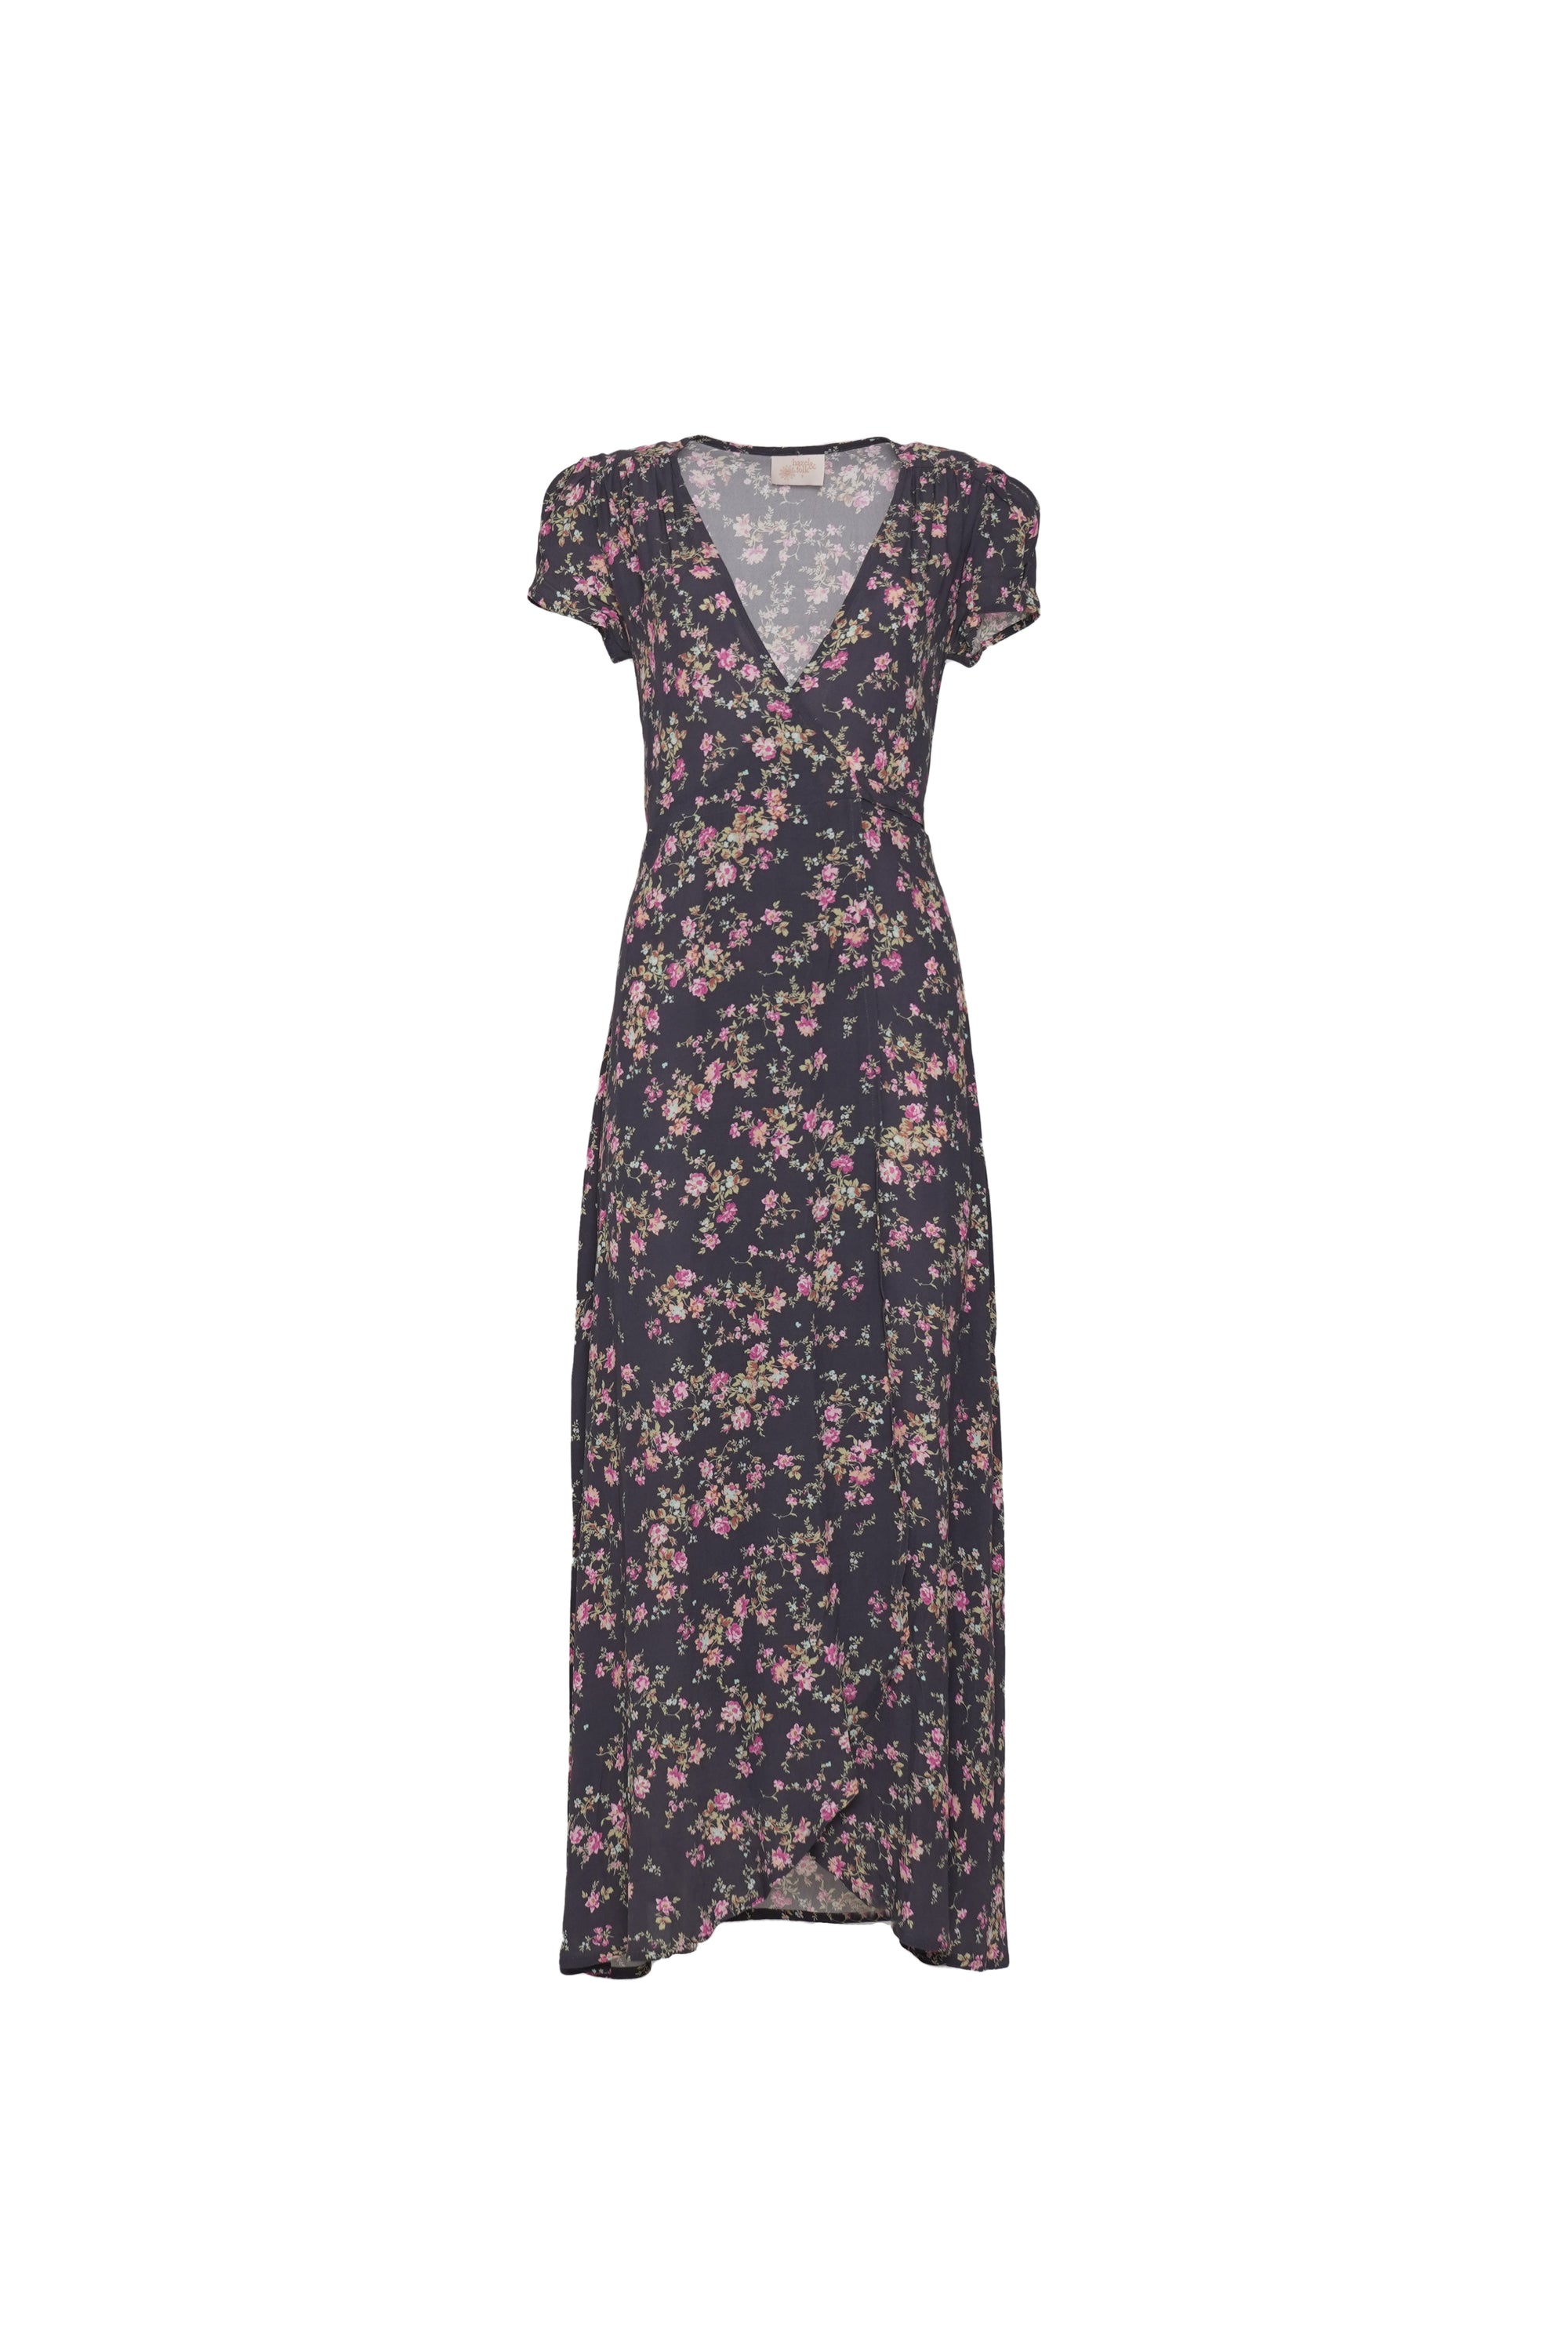 Front view of a floral print wrap maxi dress